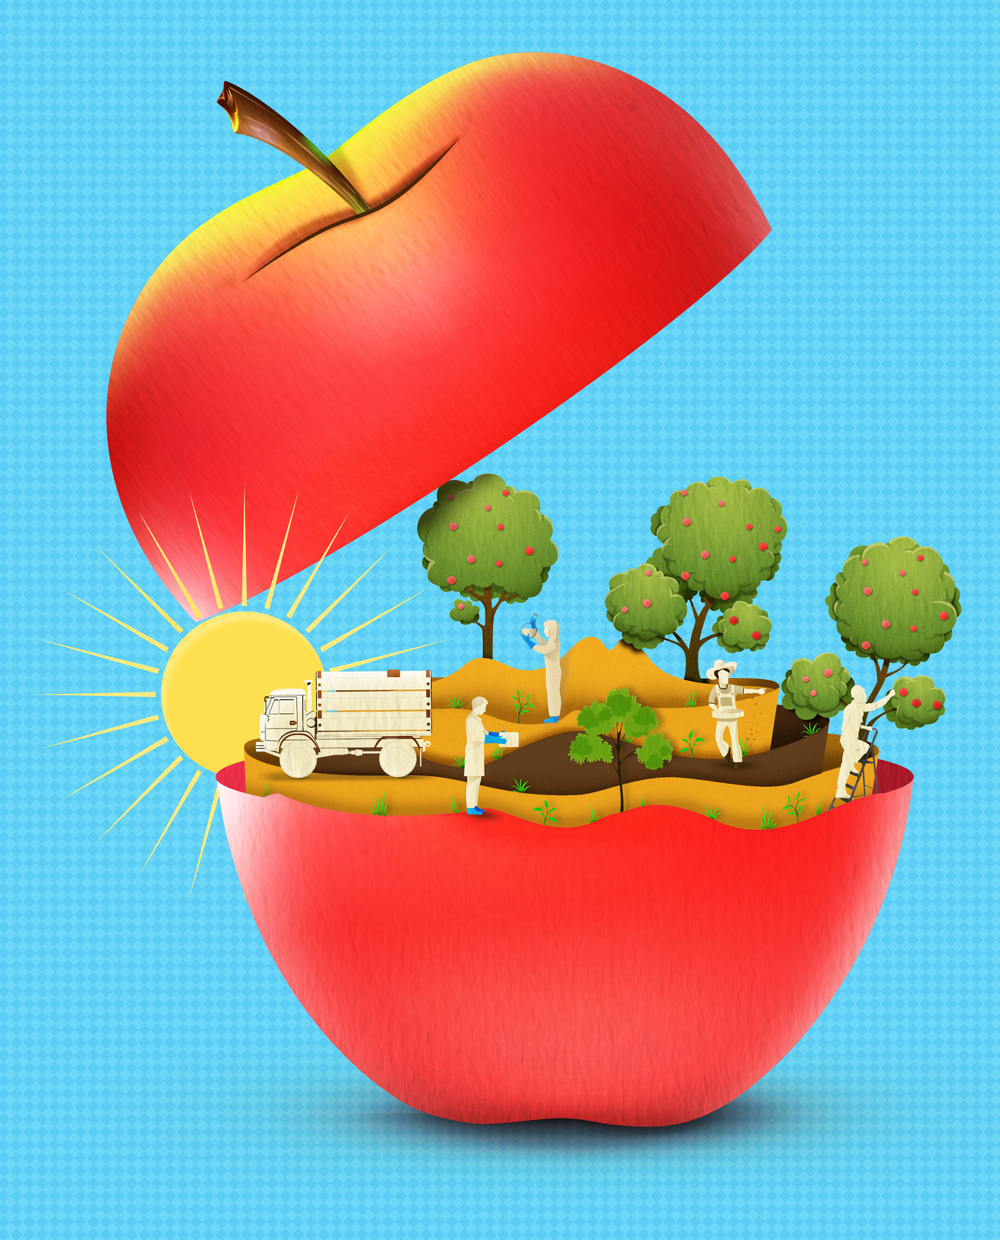 Food  science apple Agronomy world land SKY researches Government Technology